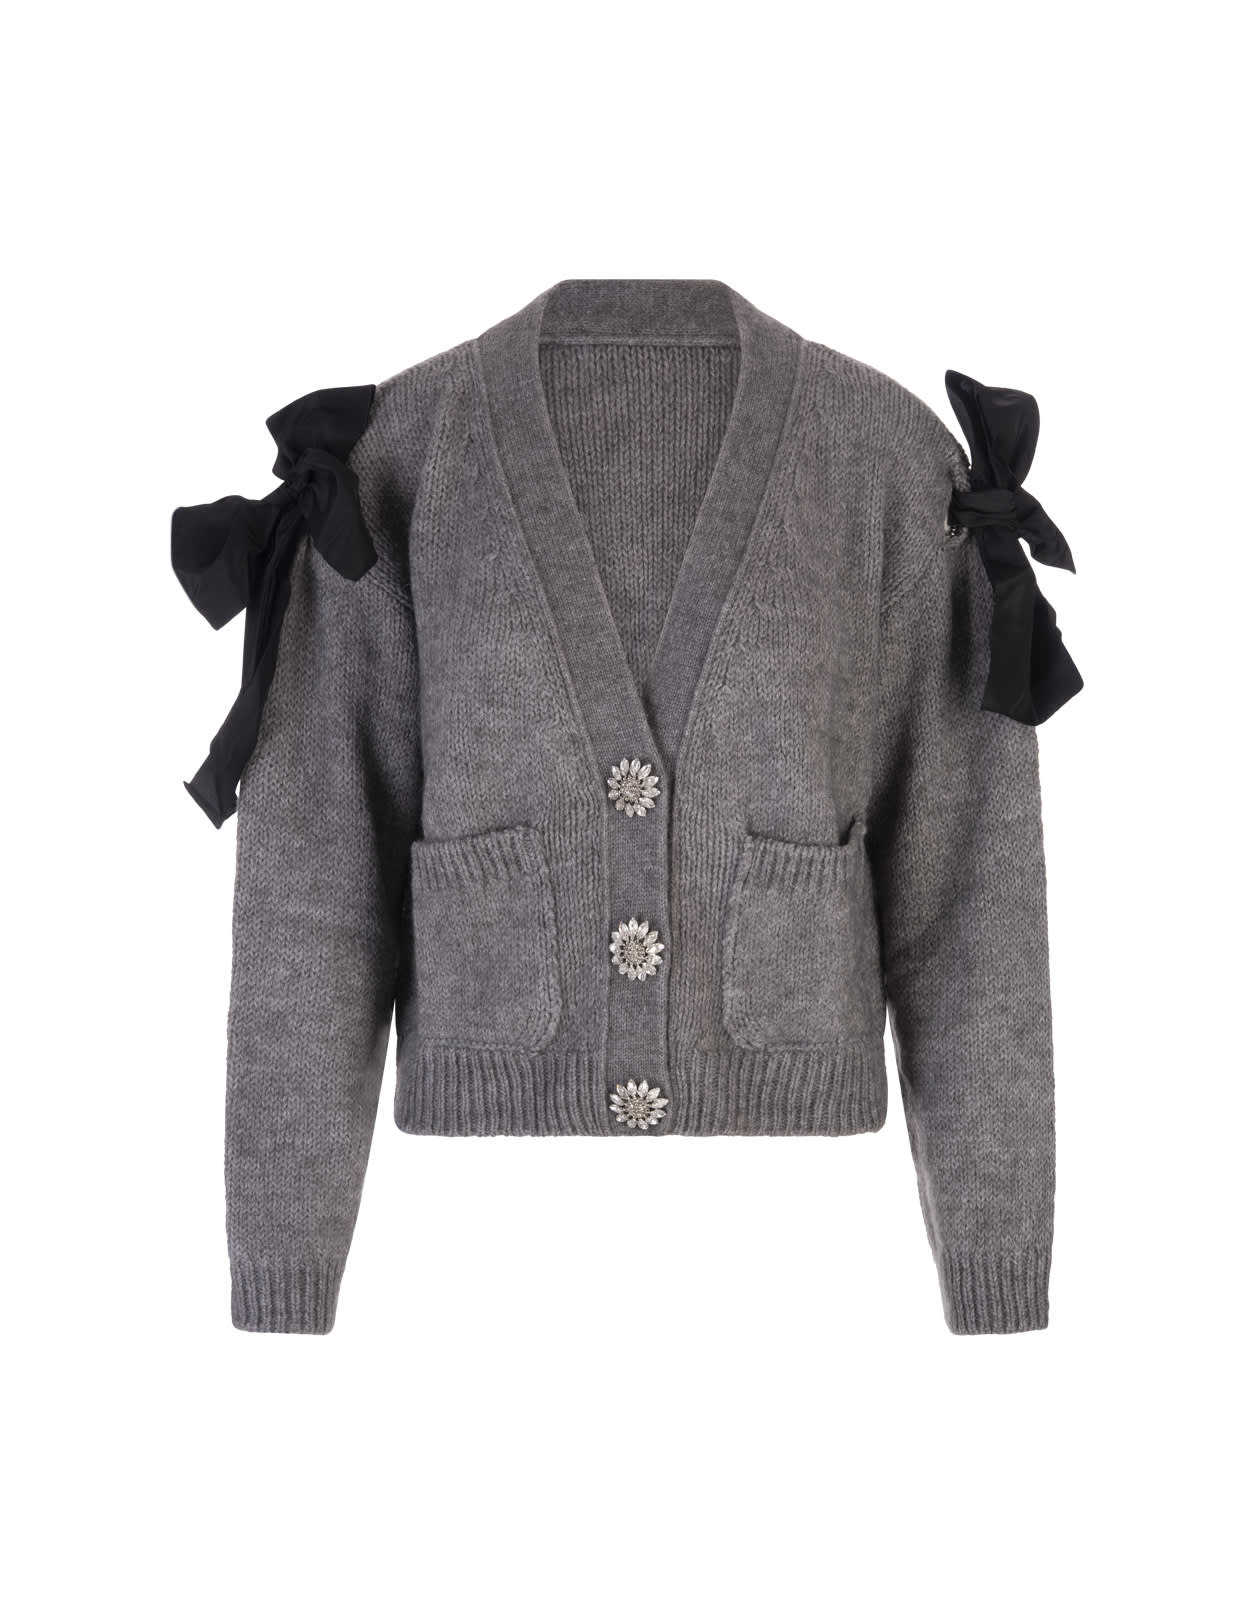 RED Valentino Grey Cardigan With Jewel Buttons